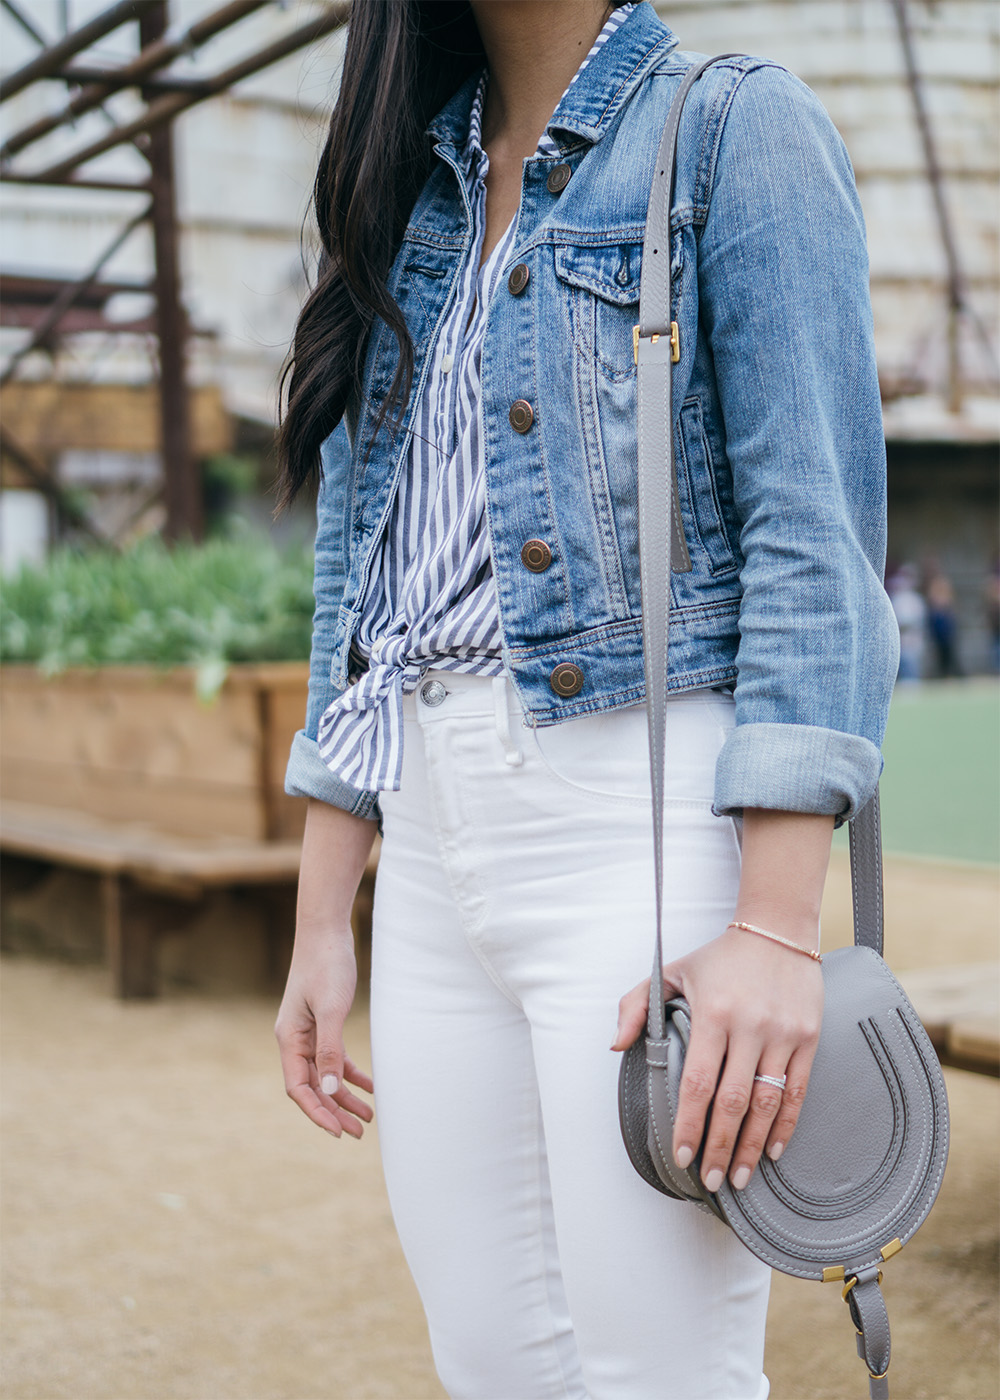 Casual Spring Outfit / Denim Jacket & White Skinny Jeans